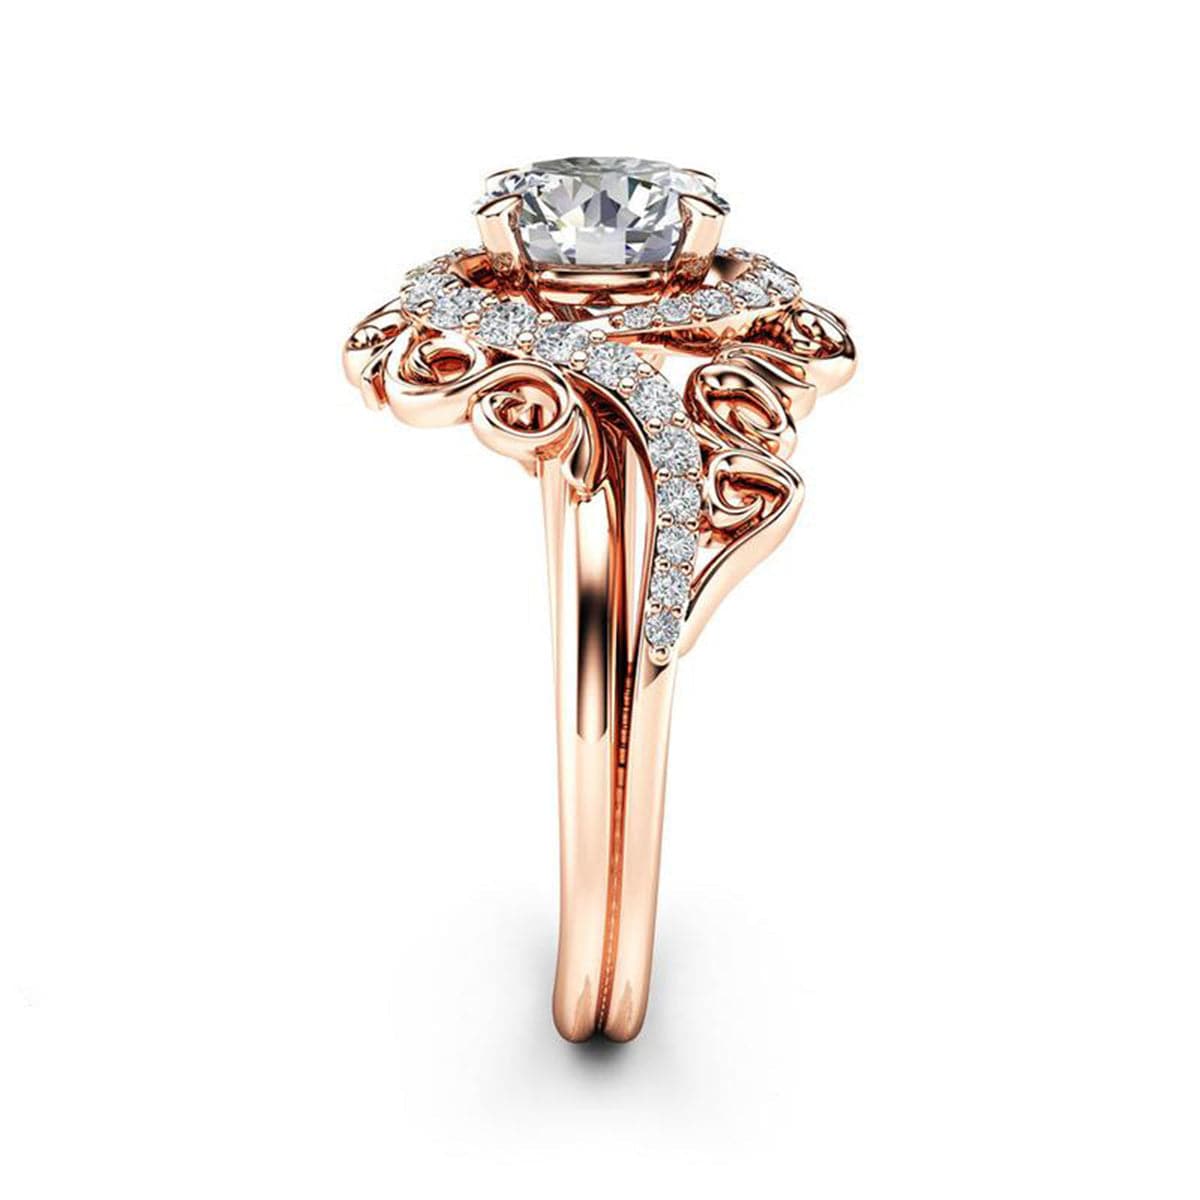 Cubic Zirconia & Crystal 18K Rose Gold-Plated Swirl Ring